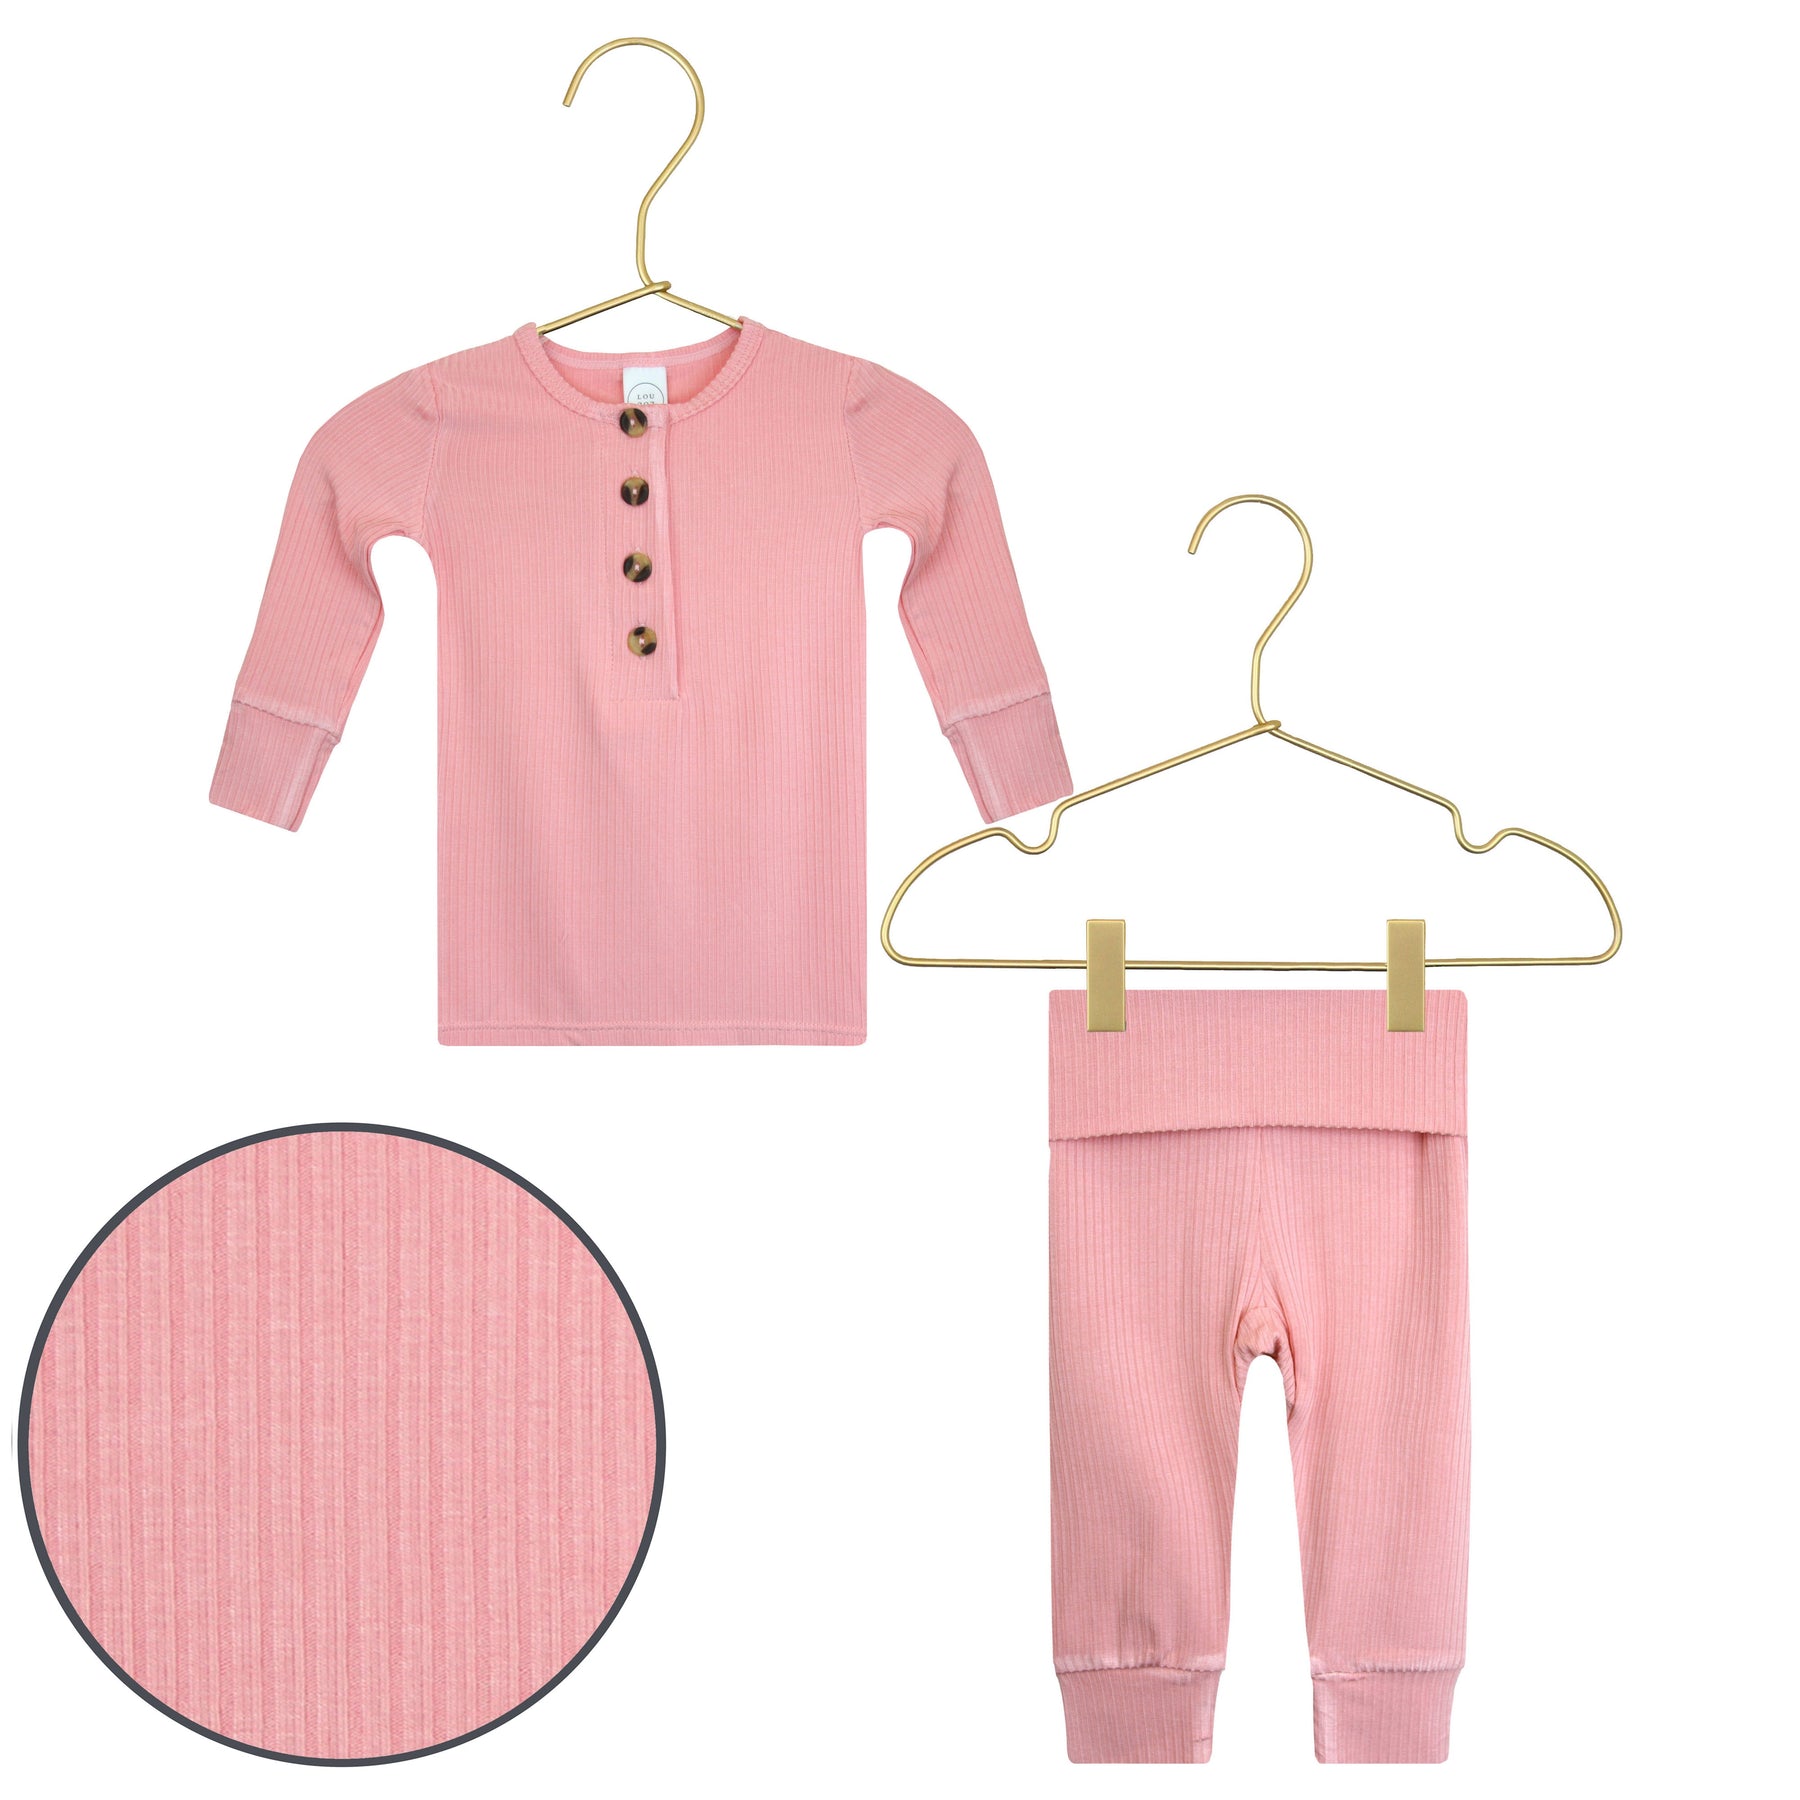 Lou Lou & Company Brielle Ribbed Top + Bottoms - Twinkle Twinkle Little One